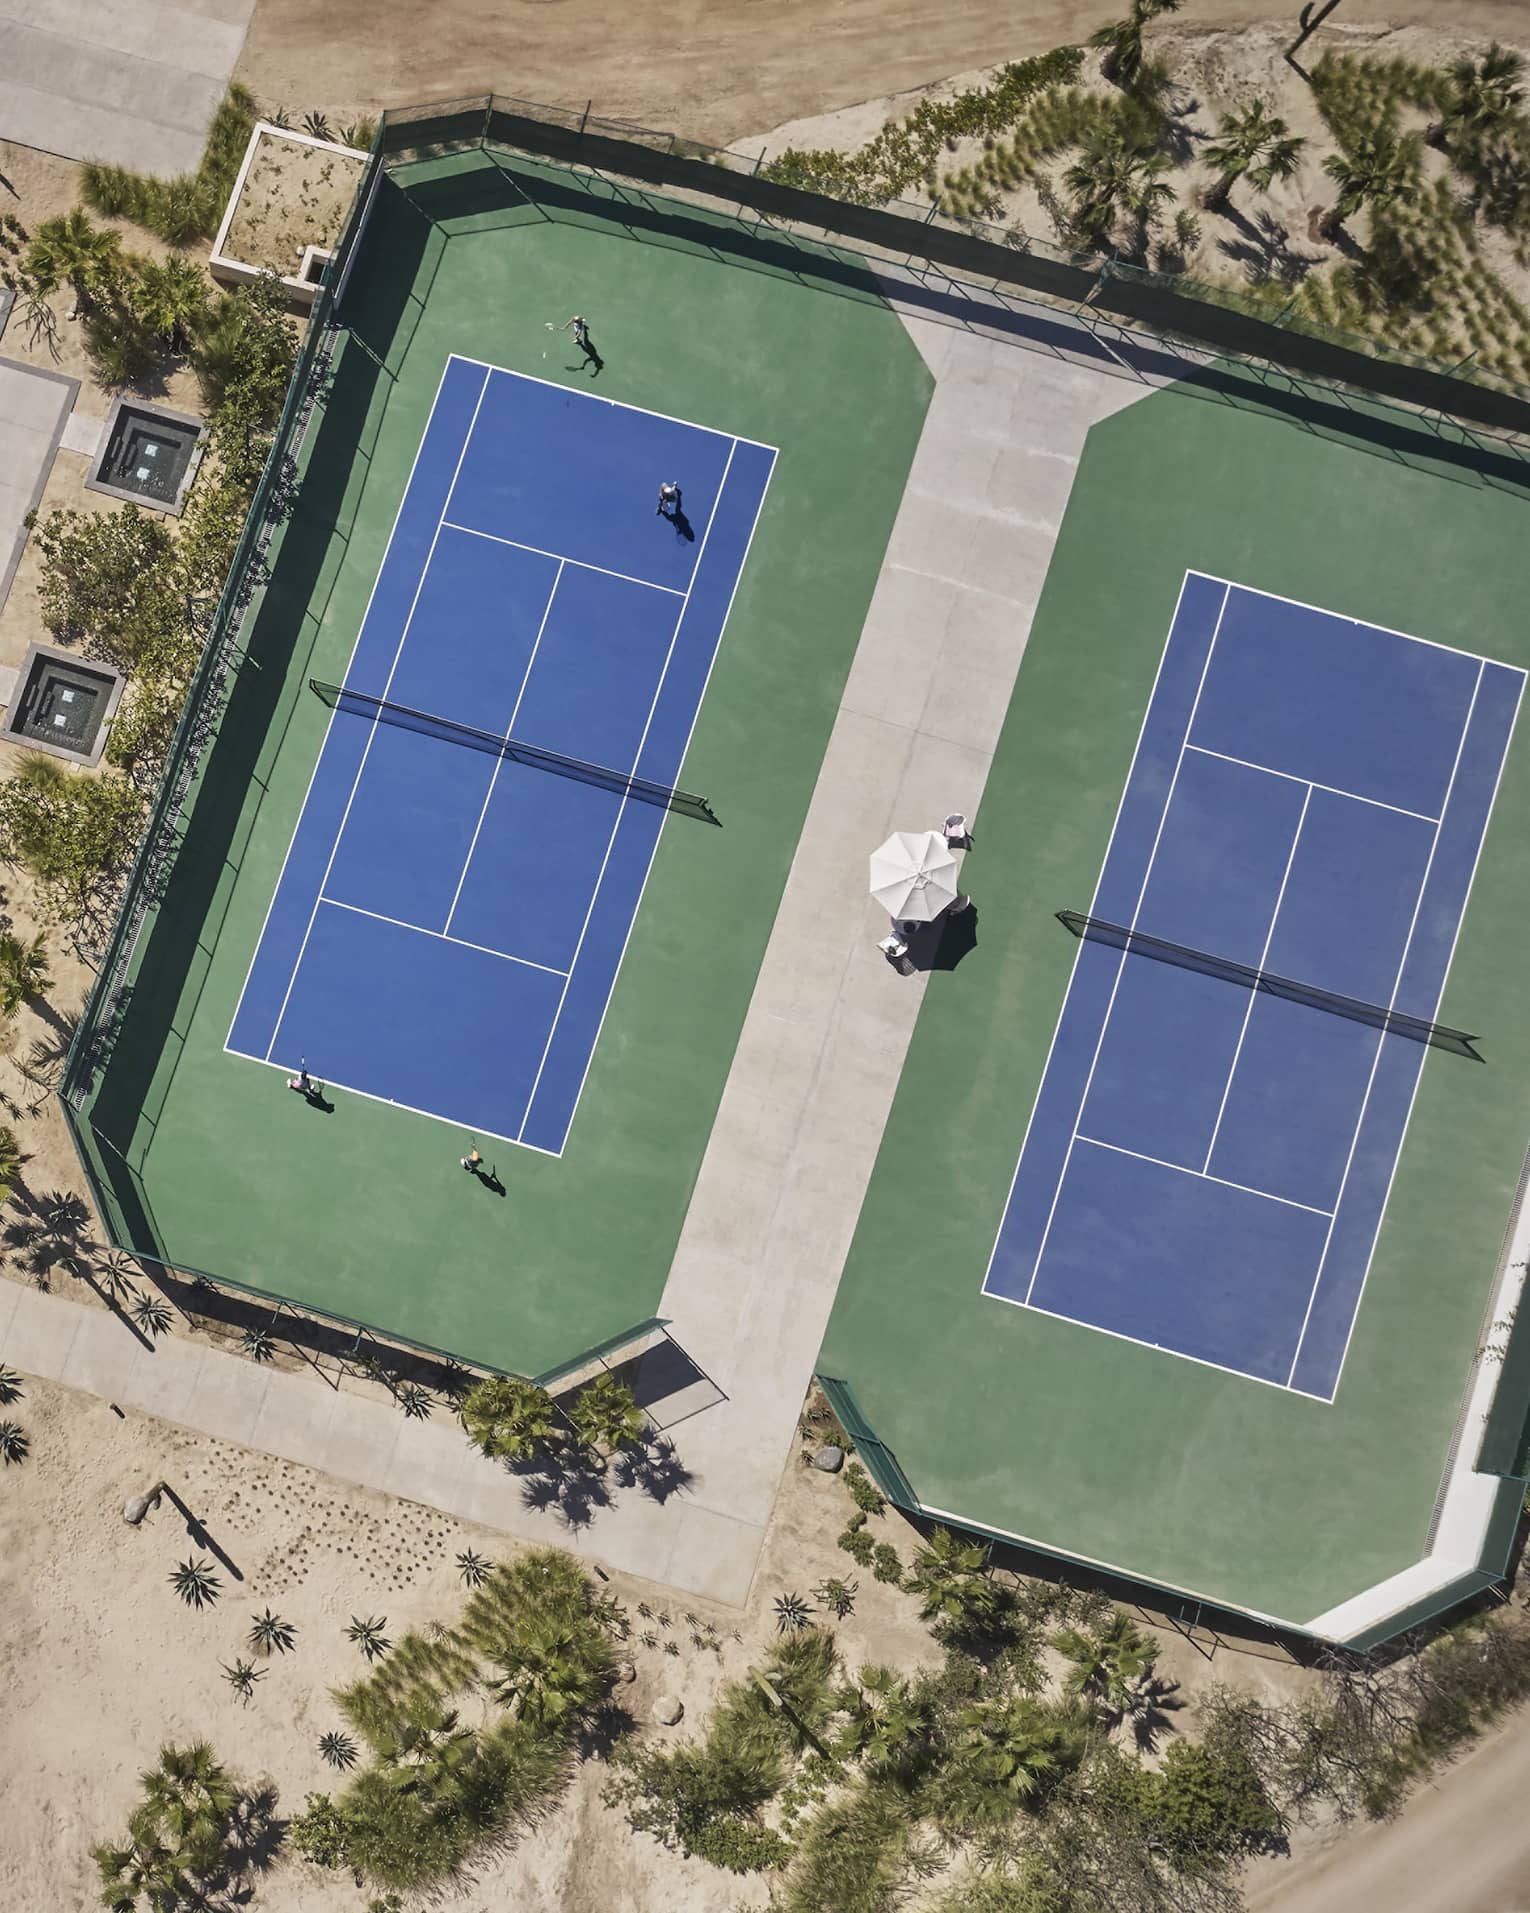 Aerial view of two green and blue tennis courts, one long rectangular pool and one blue basketball court surrounded by sand and greenery